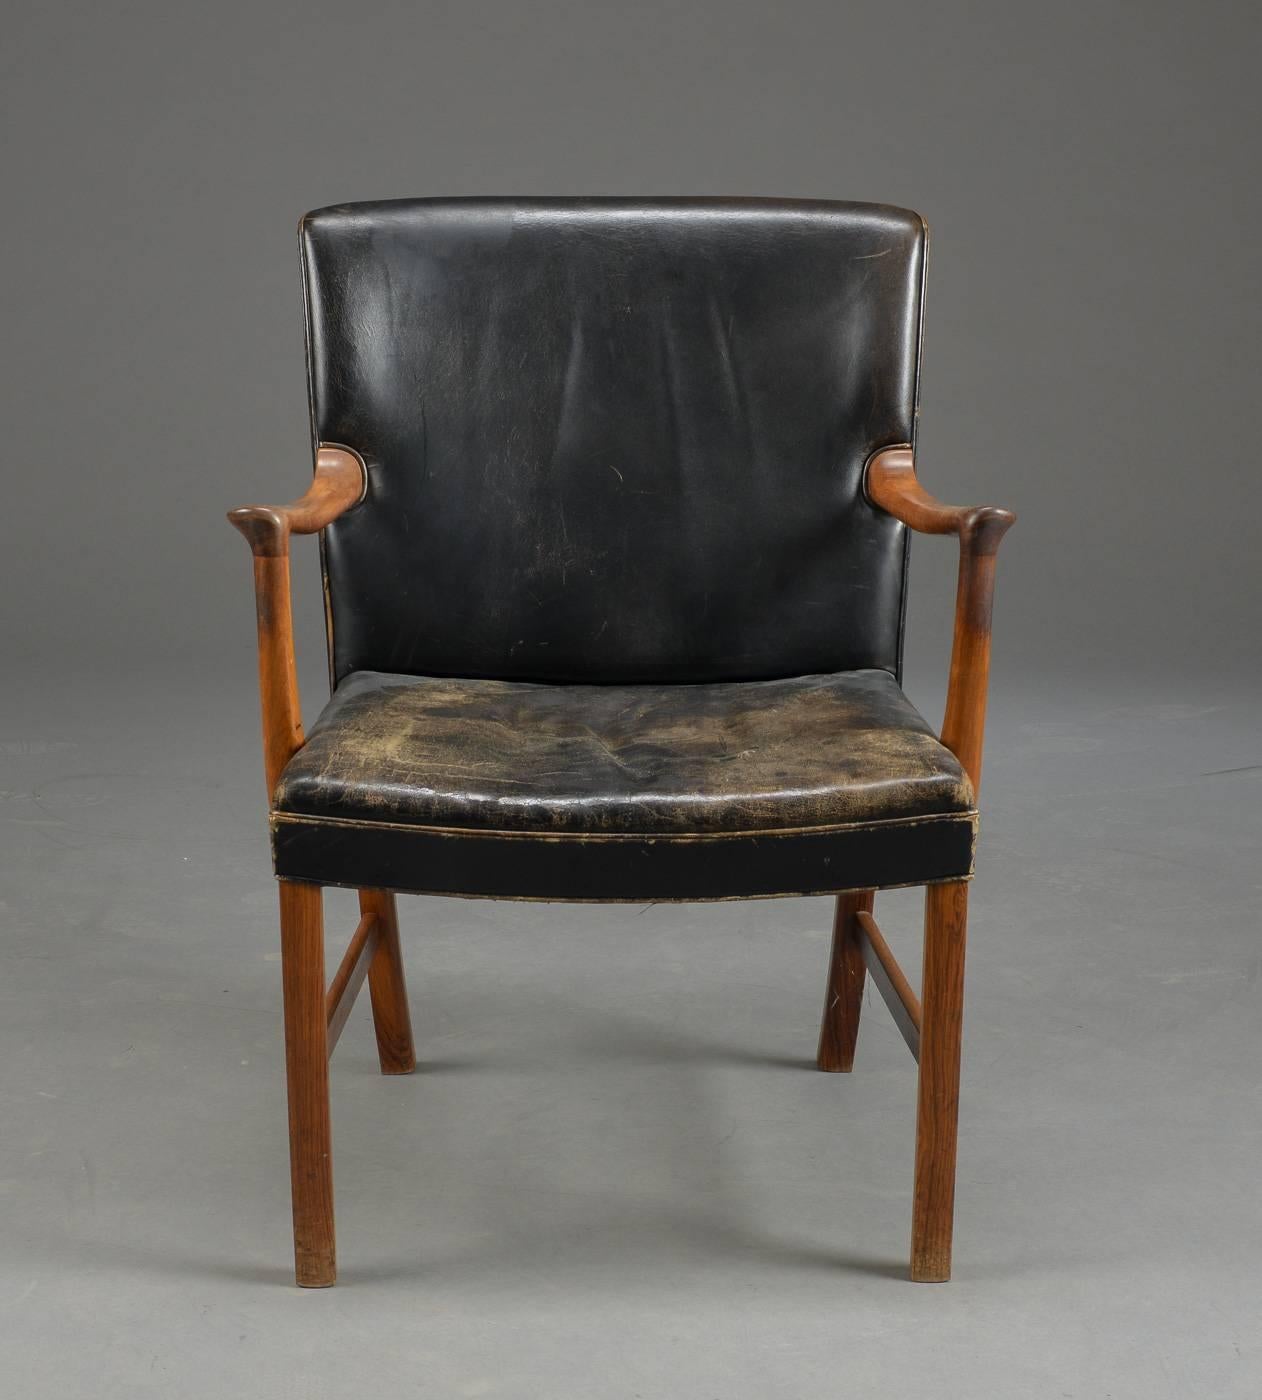 Designed by Ole Wanscher for AJ Iversen, this chair with rosewood frame and original black leather was made in the 1950s-1960s in Denmark. The frame is in excellent condition. The leather shows normal signs of age and use.